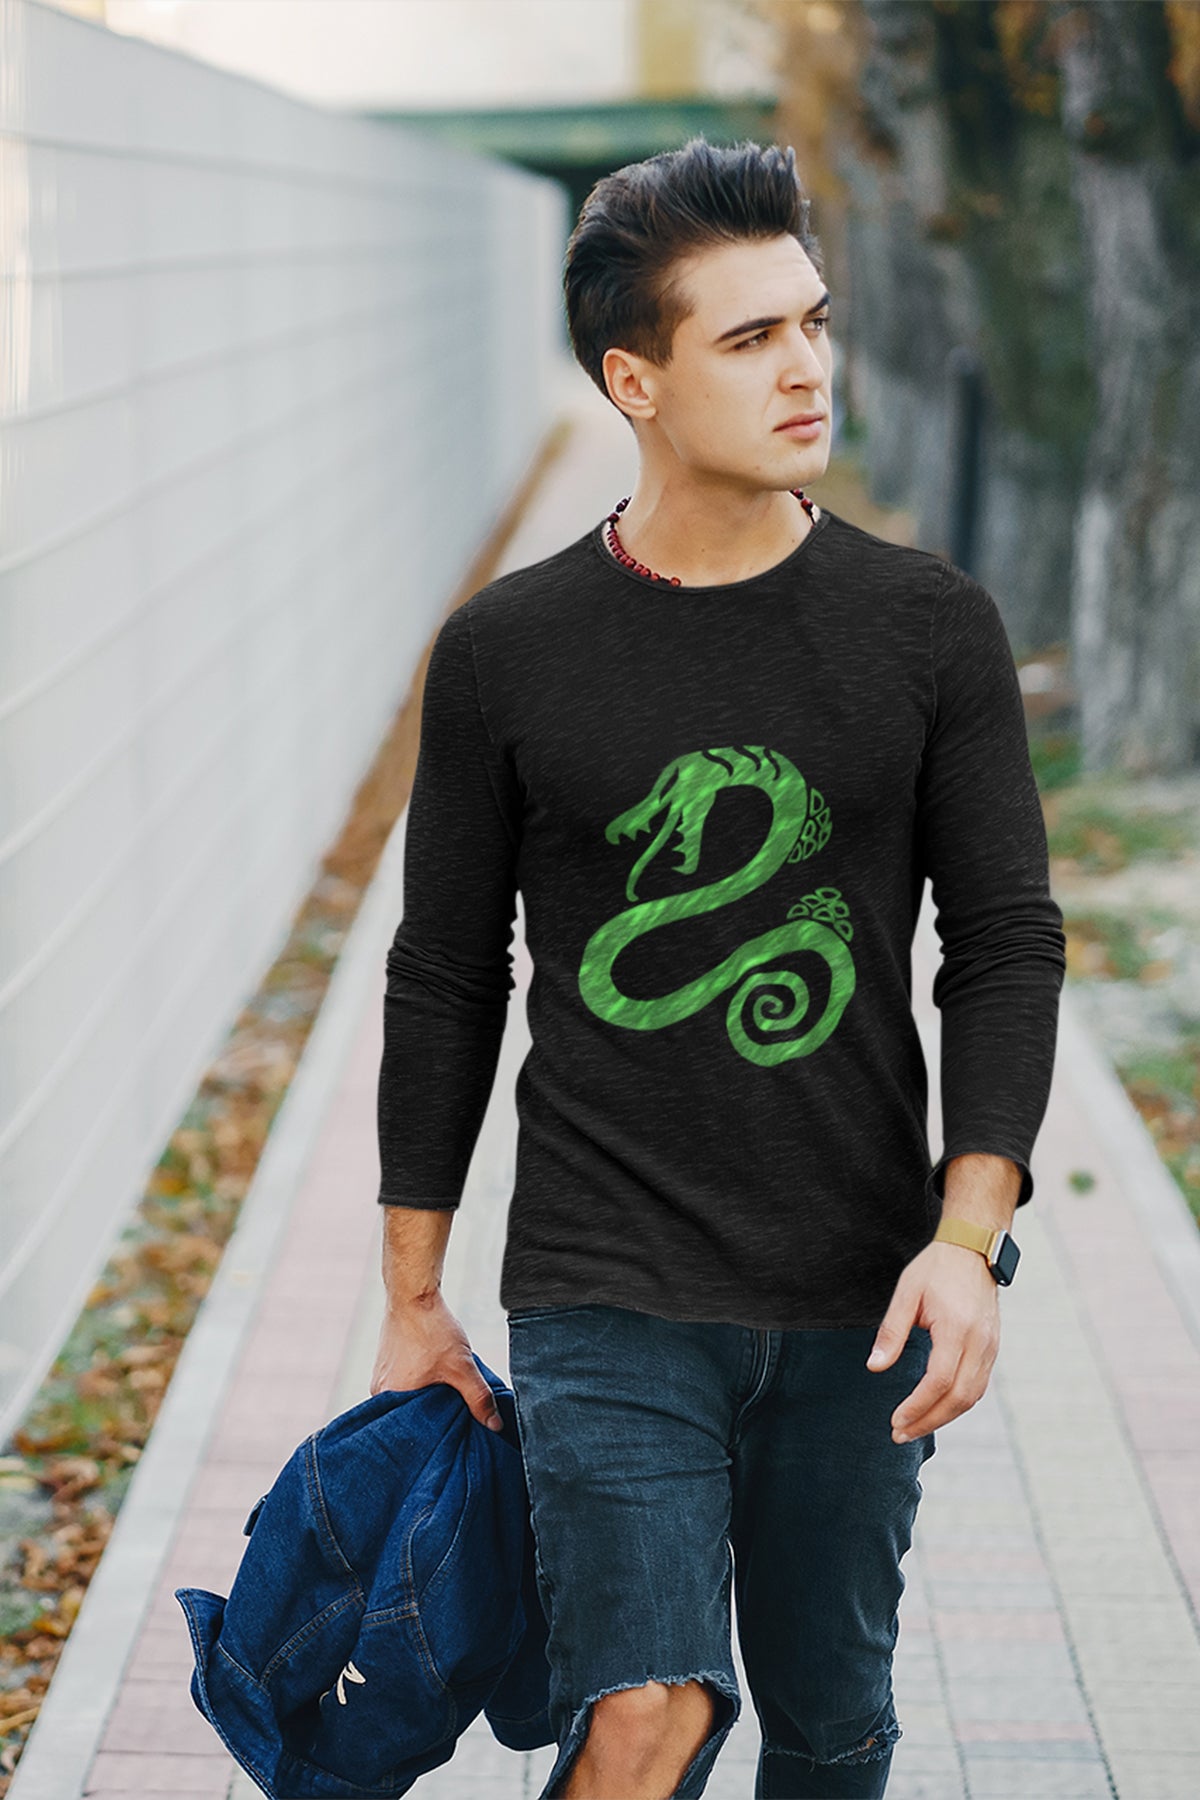 serpent sin of envy's symbol | seven deadly sins t-shirts online | anime merchandise india | amazon | the unrealm